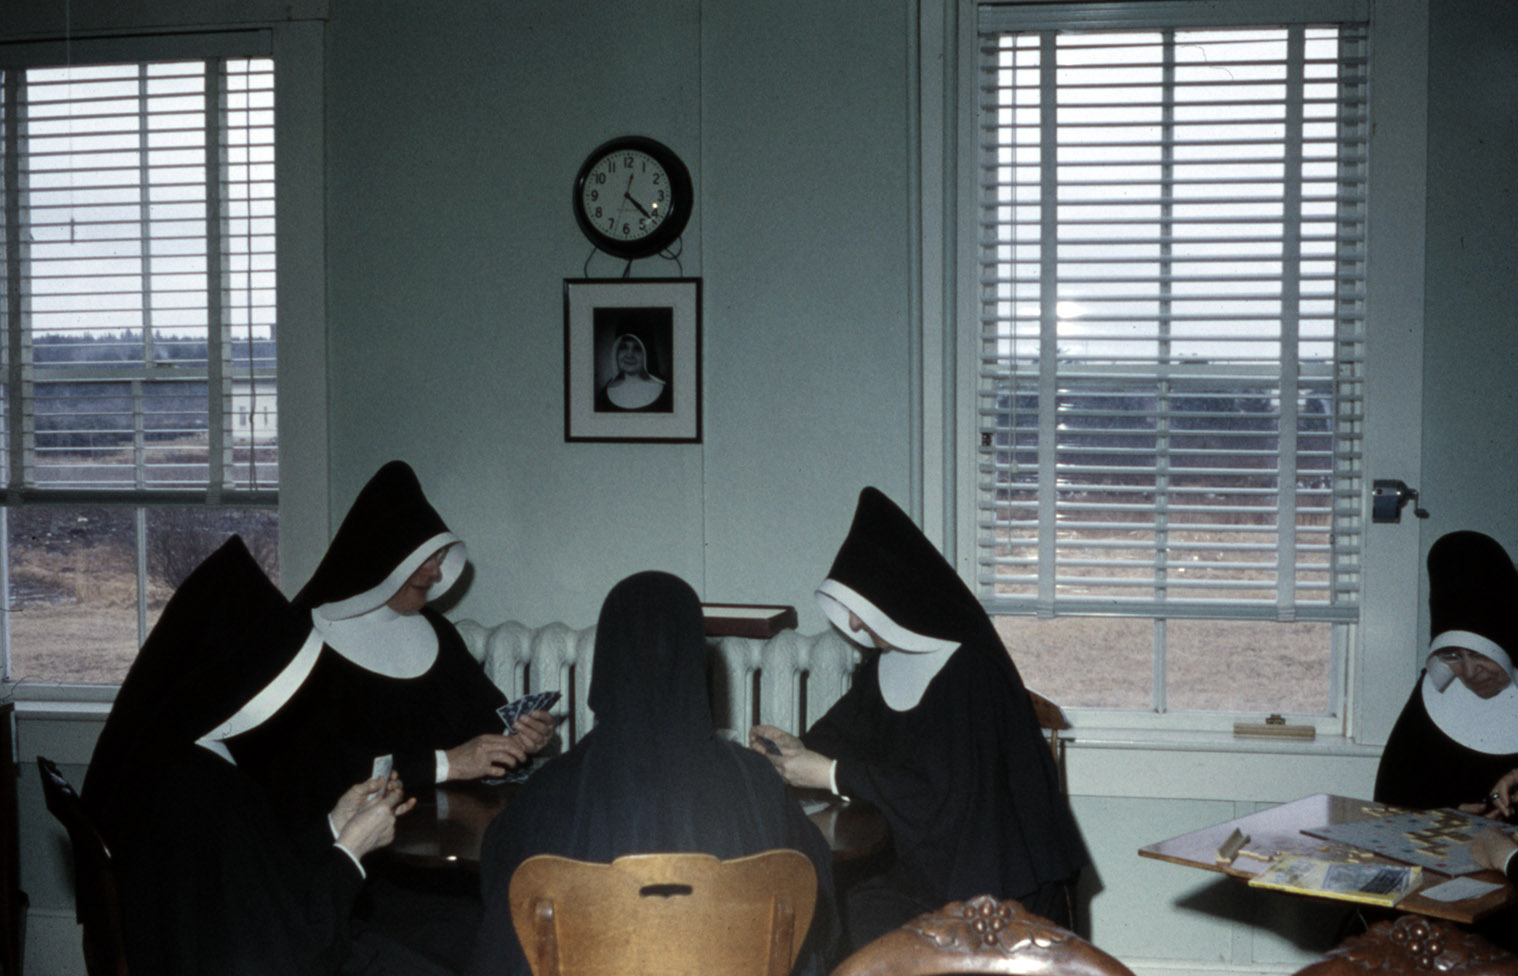 communityalbums - Sisters of Charity-Halifax playing Rook and Scrabble, Saint Mary's Convent, Church Point, Nova Scotia.